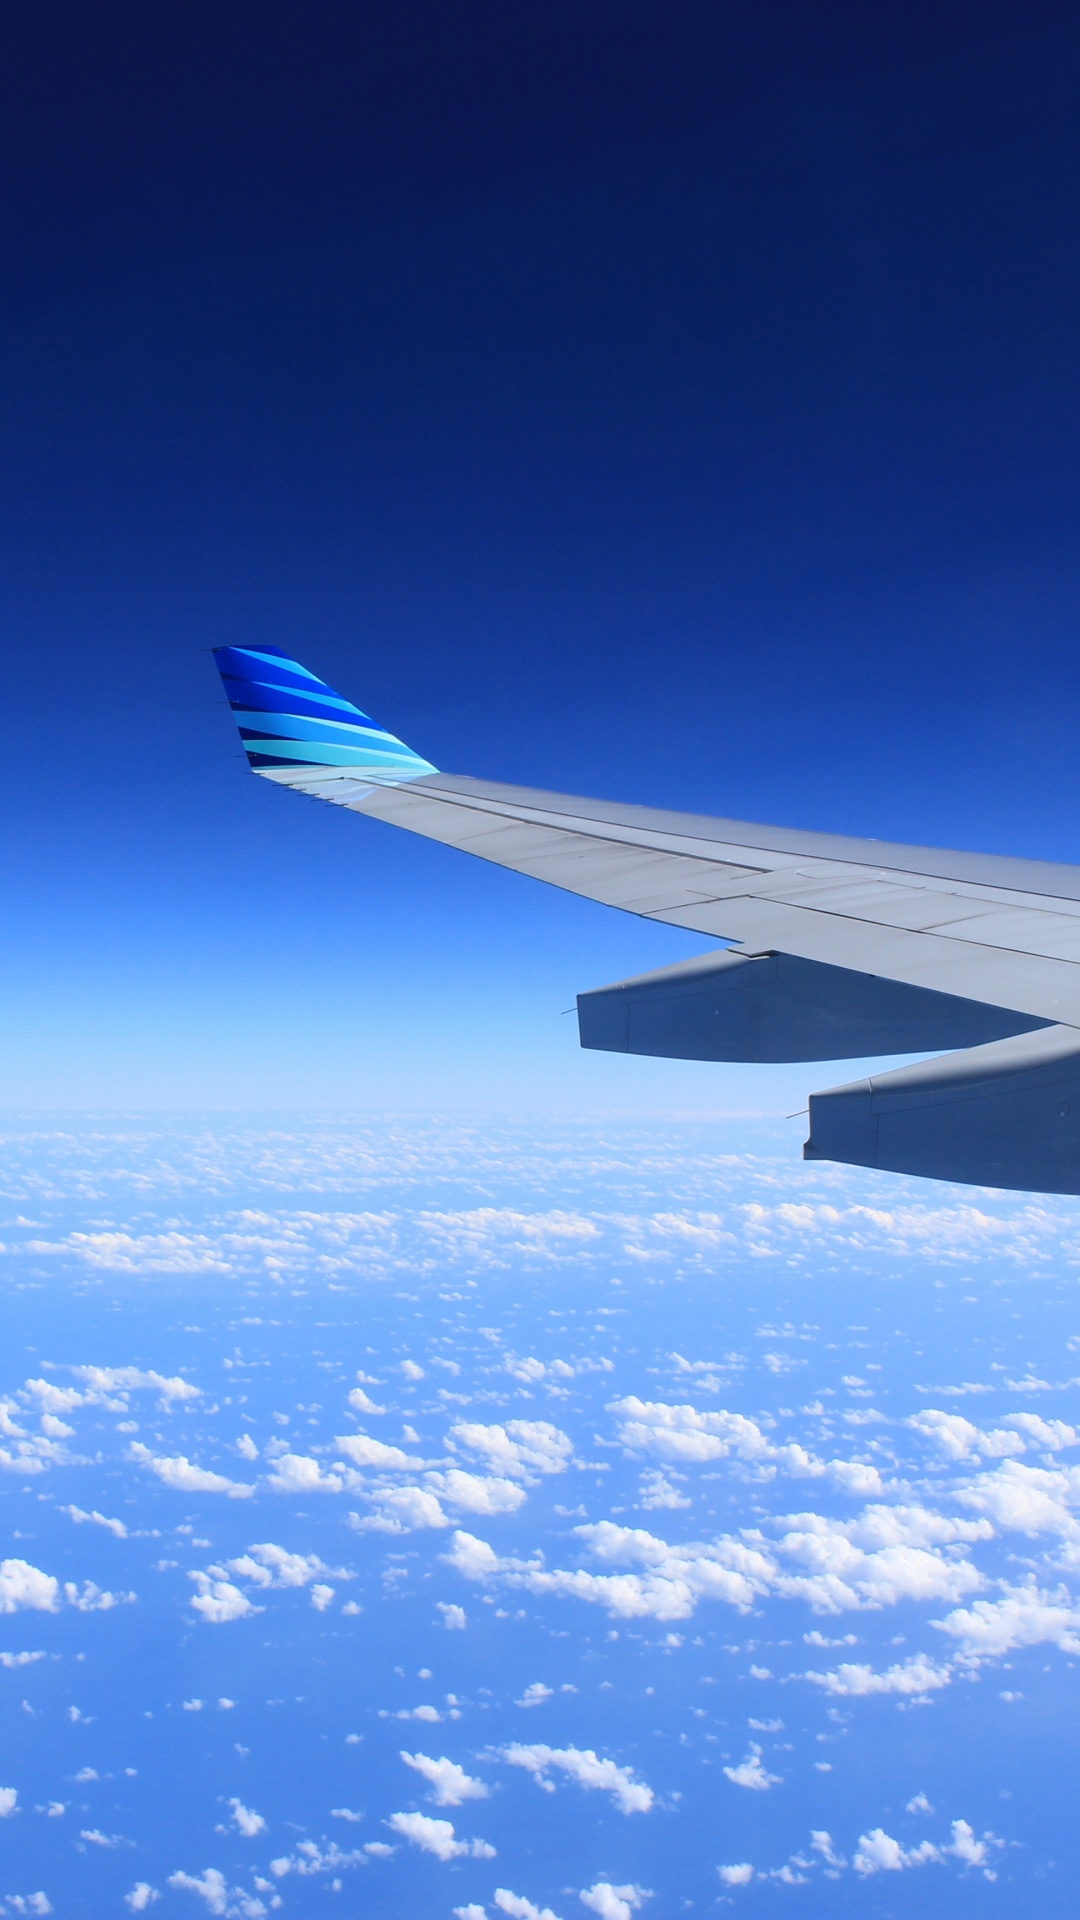 White and Blue Airplane Wing Under Blue Sky During Daytime. Wallpaper in 1080x1920 Resolution